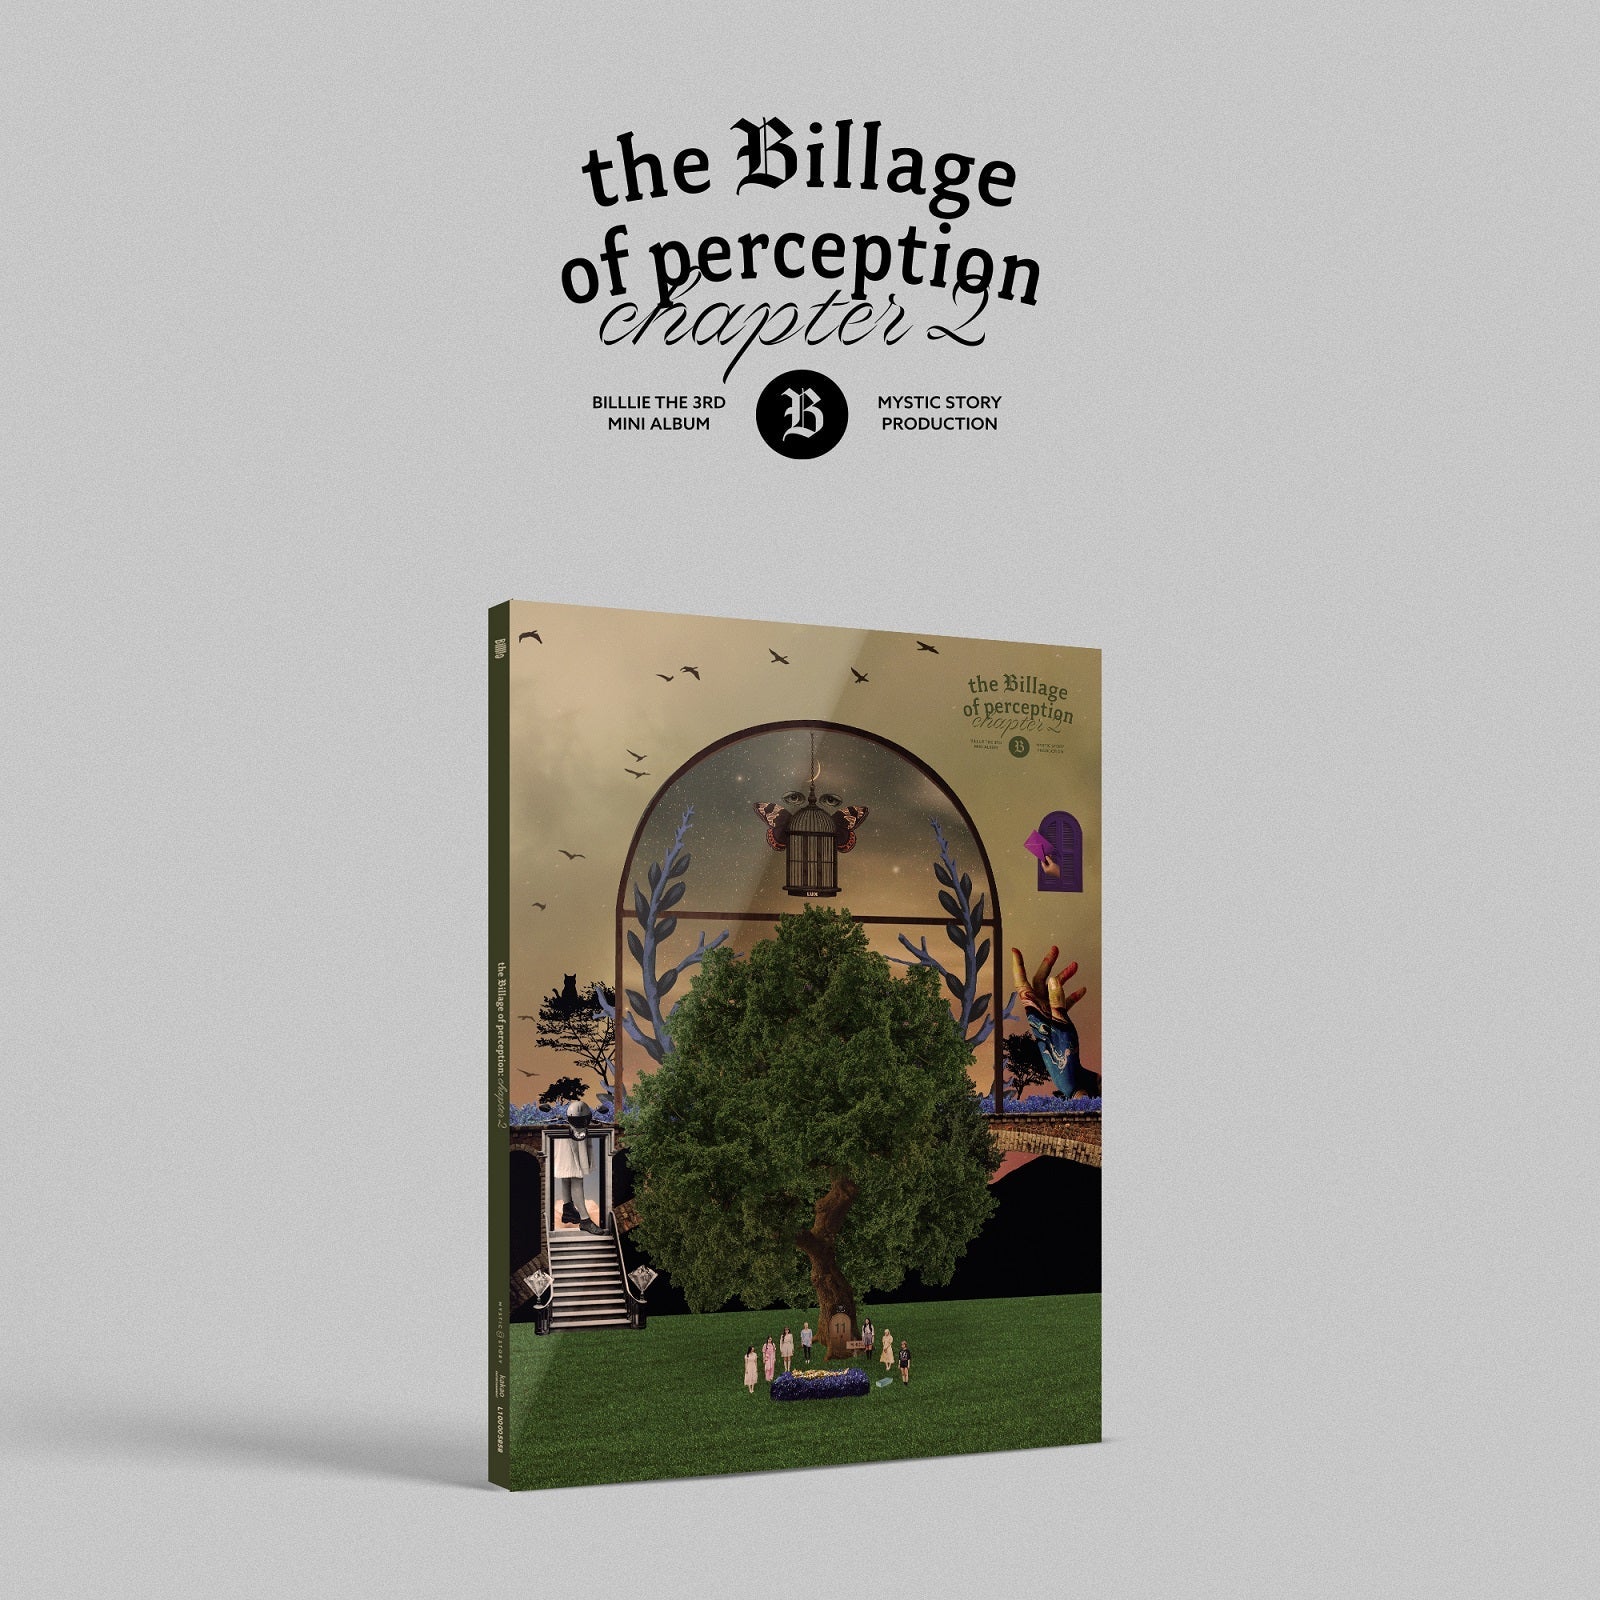 BILLLIE 3RD MINI ALBUM 'THE BILLAGE OF PERCEPTION : CHAPTER TWO' LUX VERSION COVER